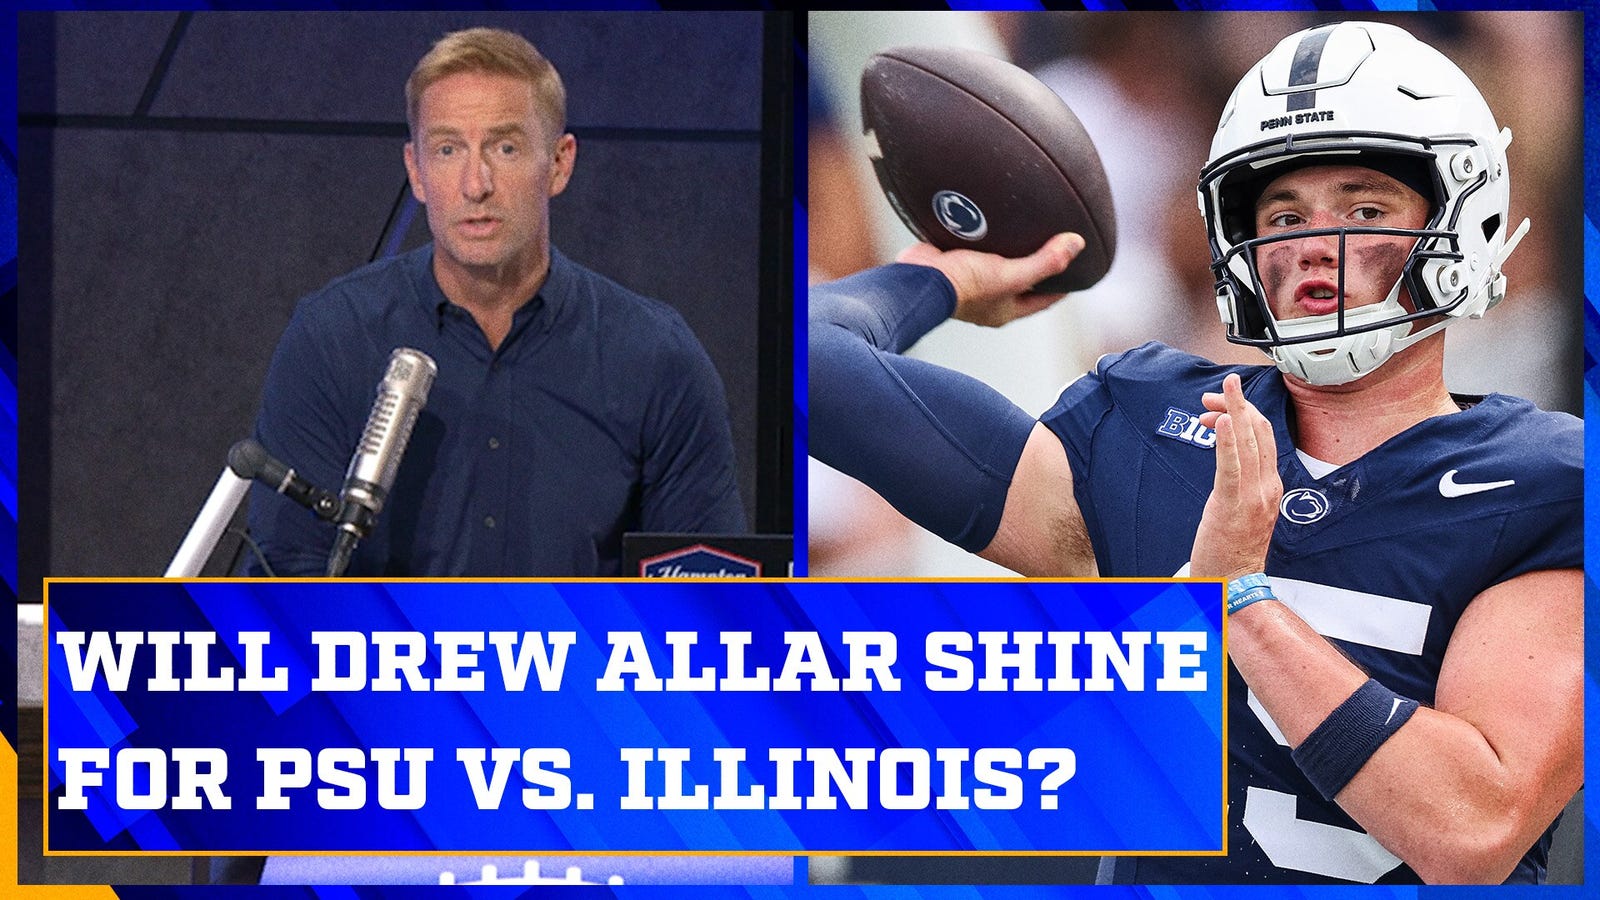 Will Drew Allar lead Penn State to a win over Illinois?